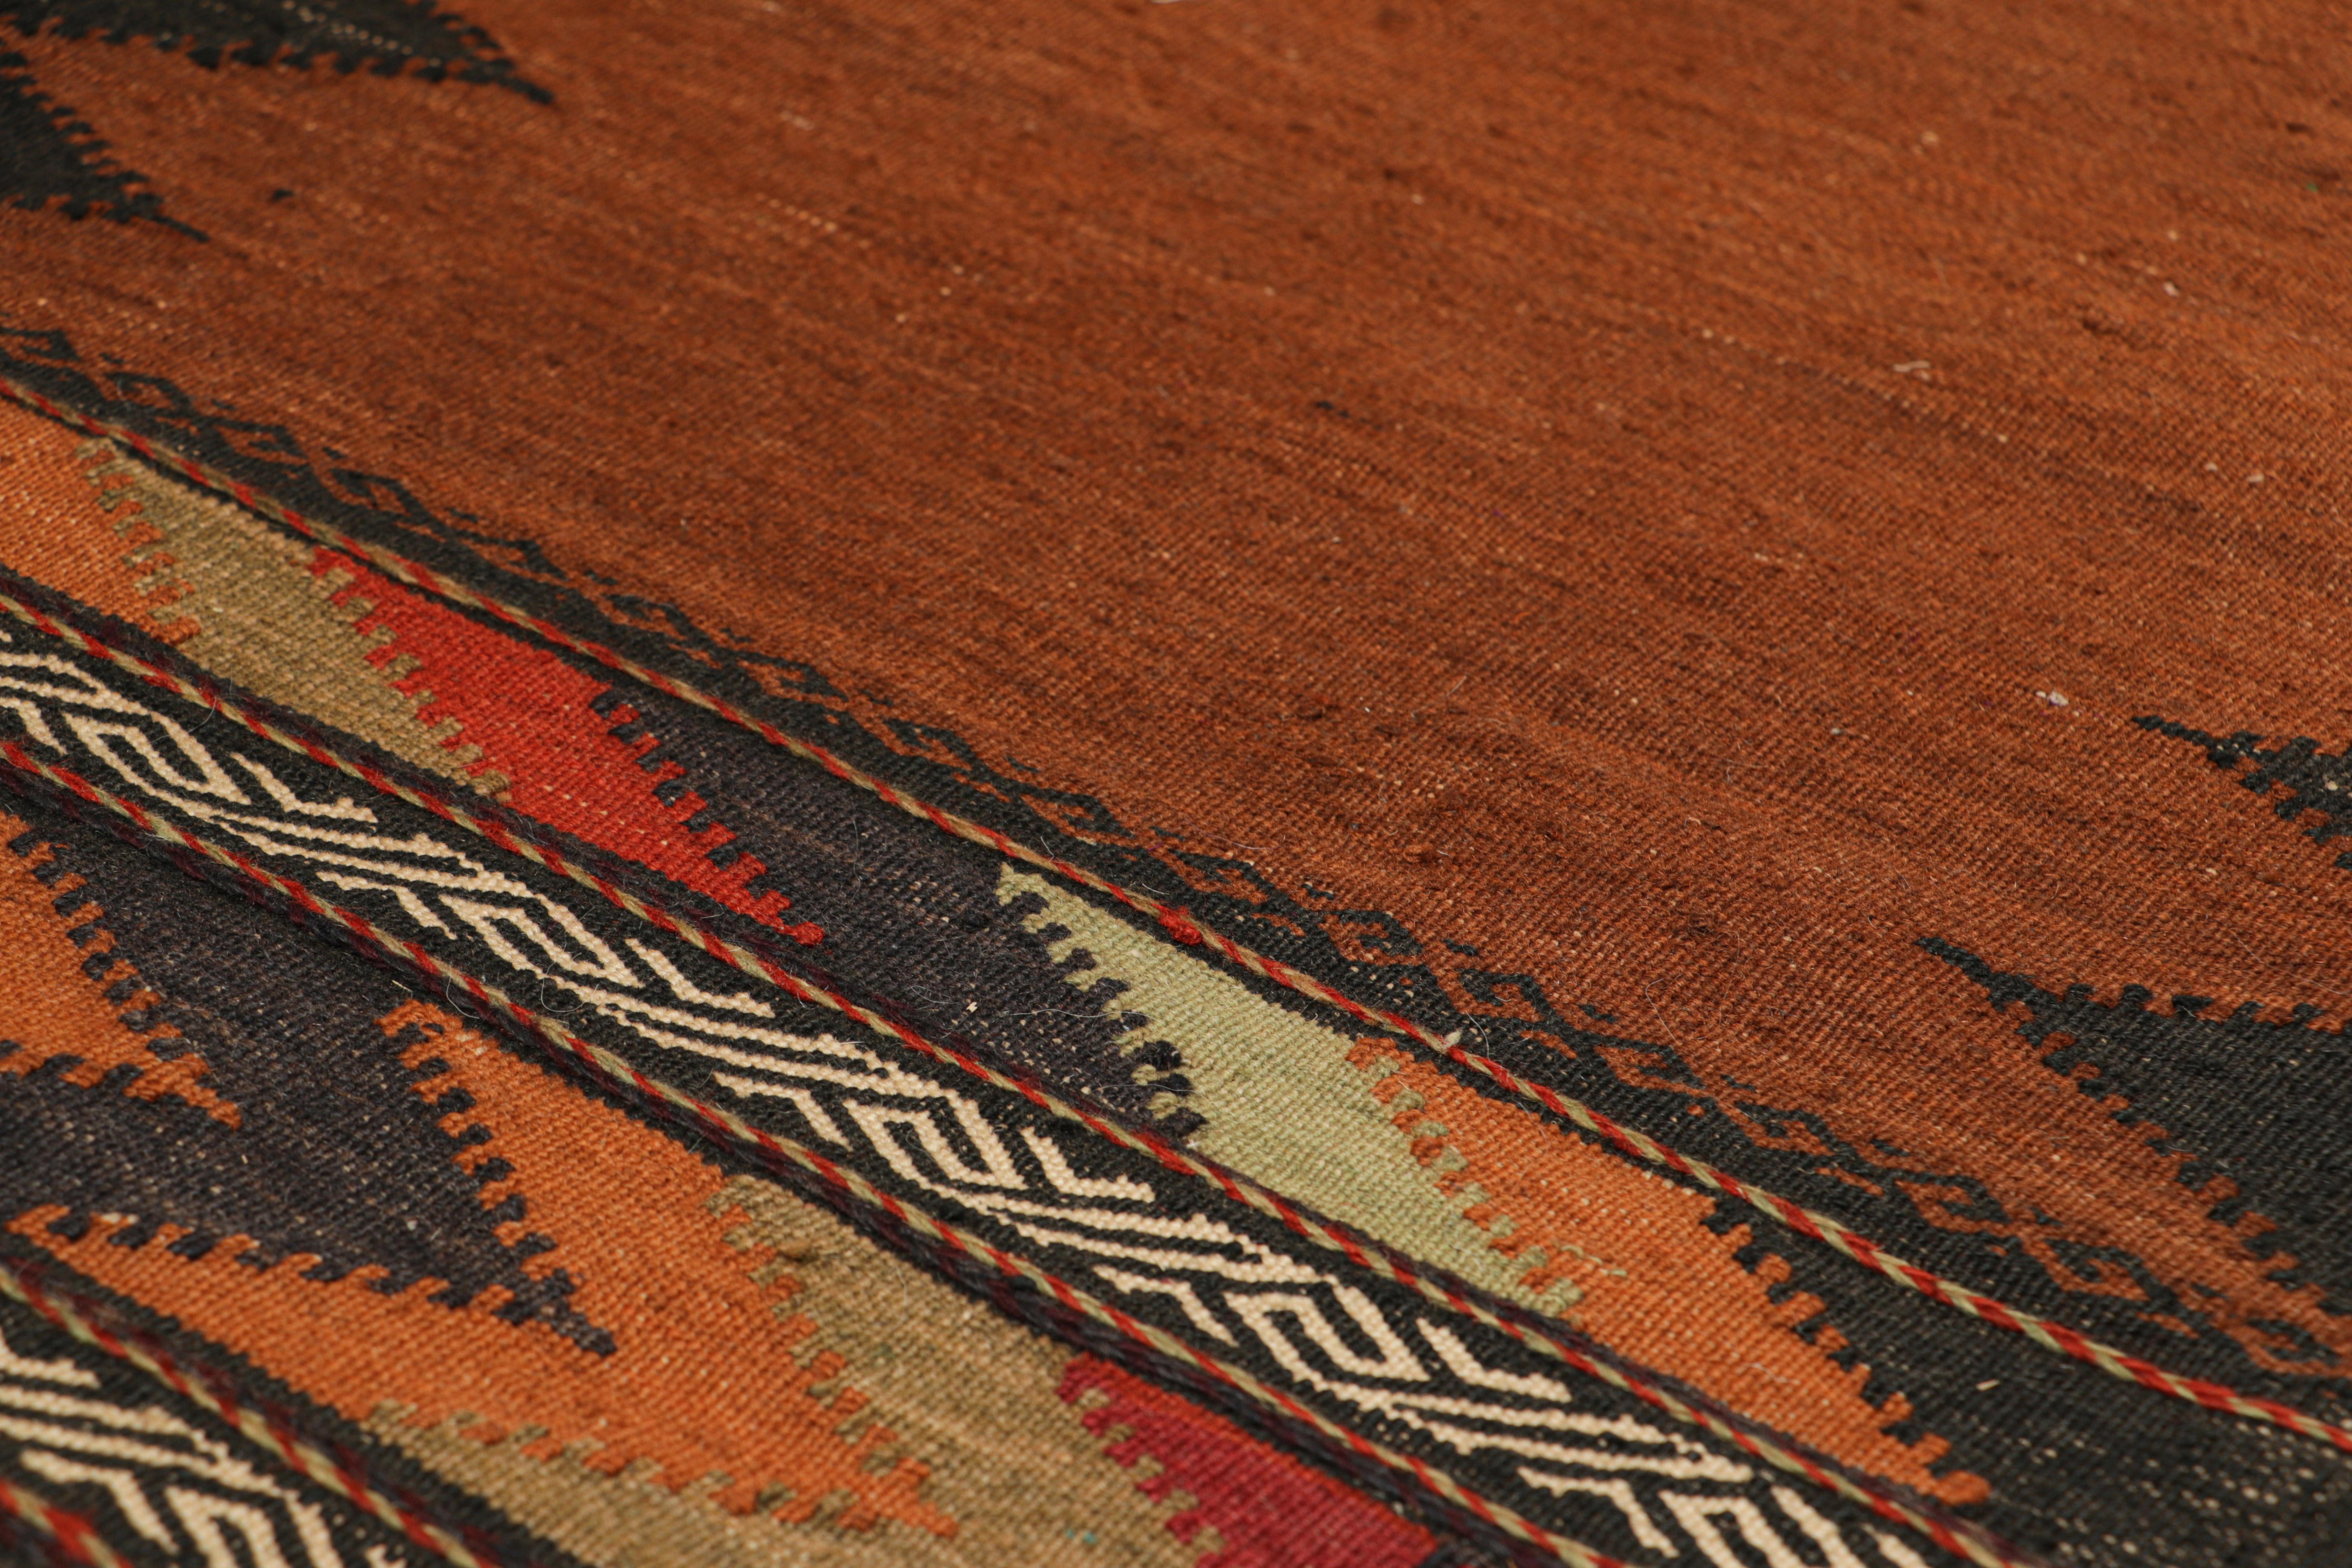 Hand-Woven Vintage Afghan Kilim in Rust, with Polychromatic Patterns from Rug & Kilim For Sale